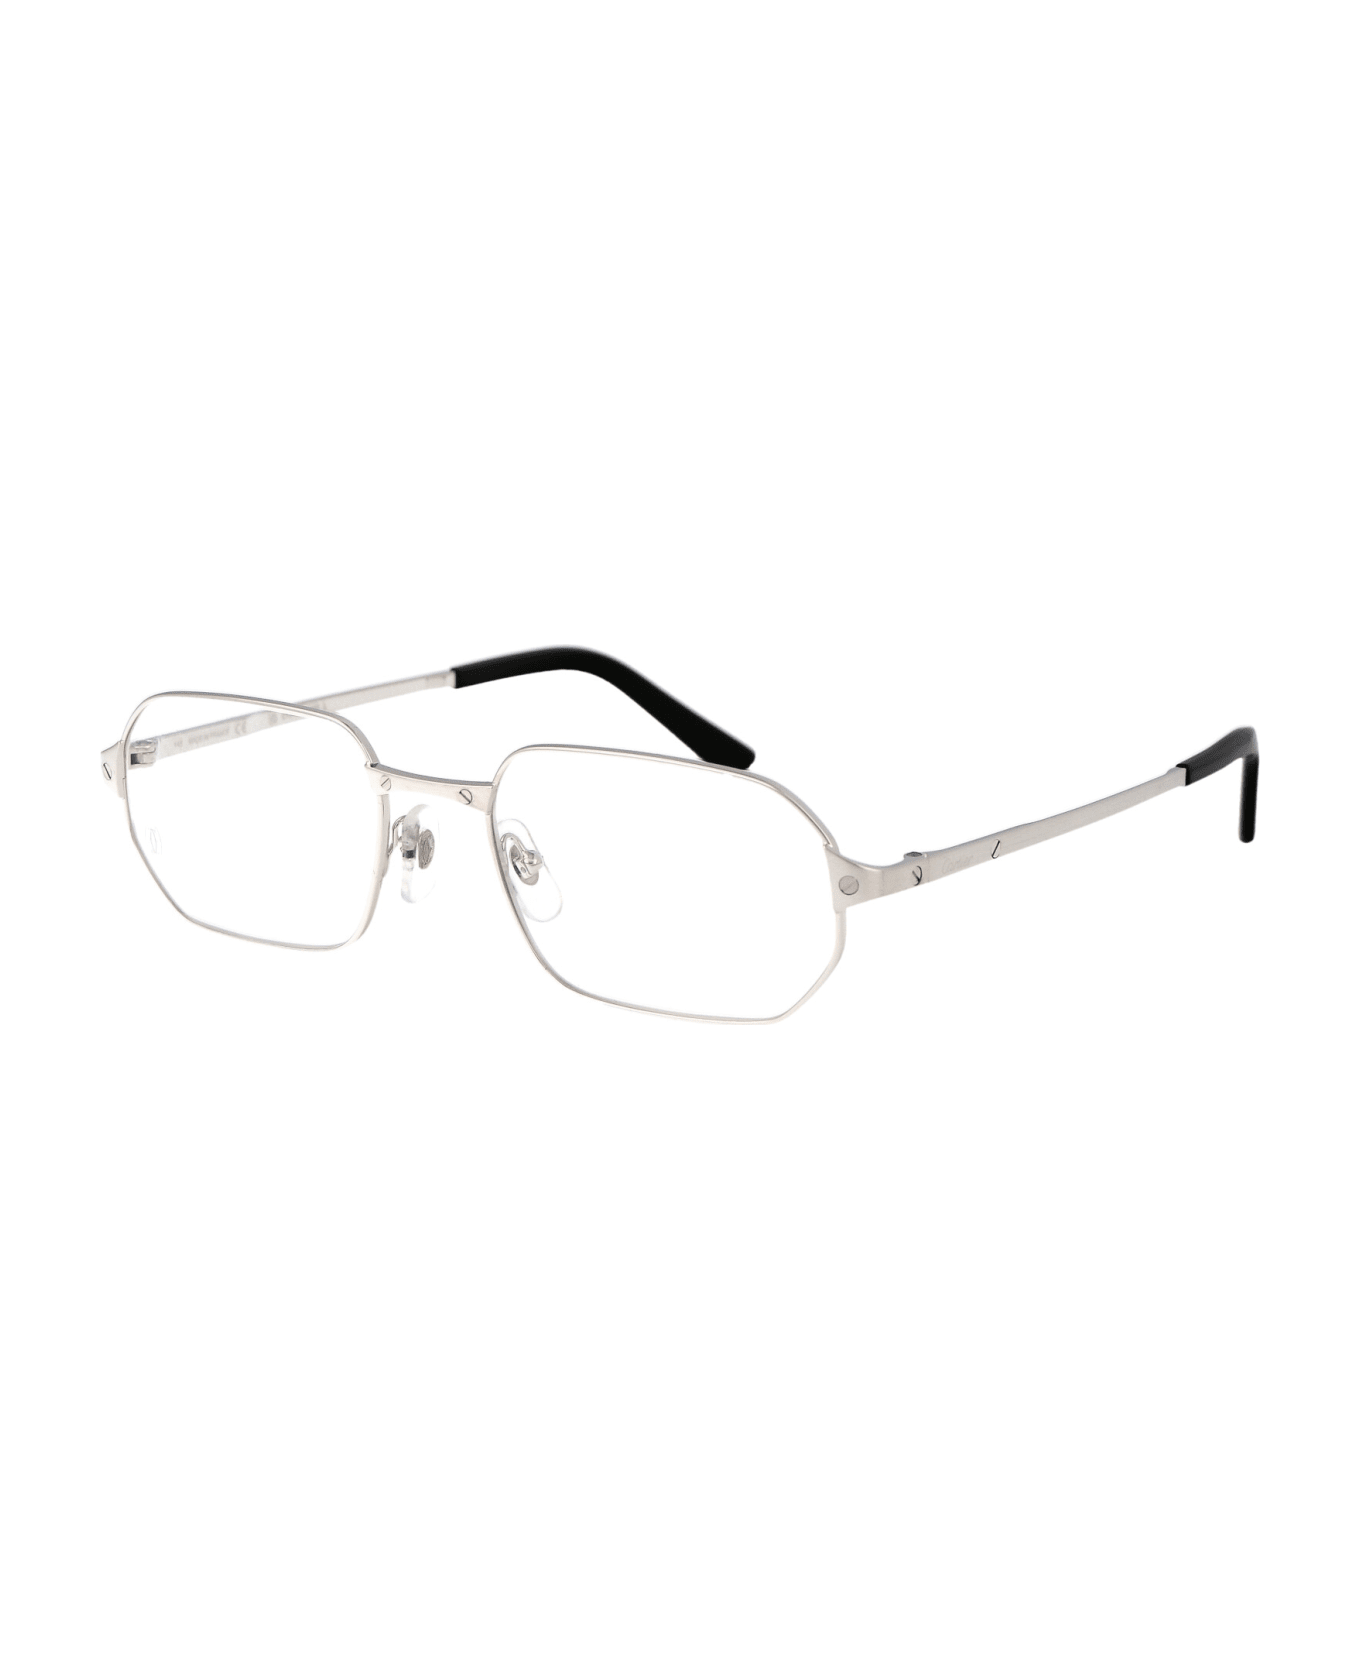 Cartier Eyewear Ct0442o Glasses - 002 SILVER SILVER TRANSPARENT アイウェア